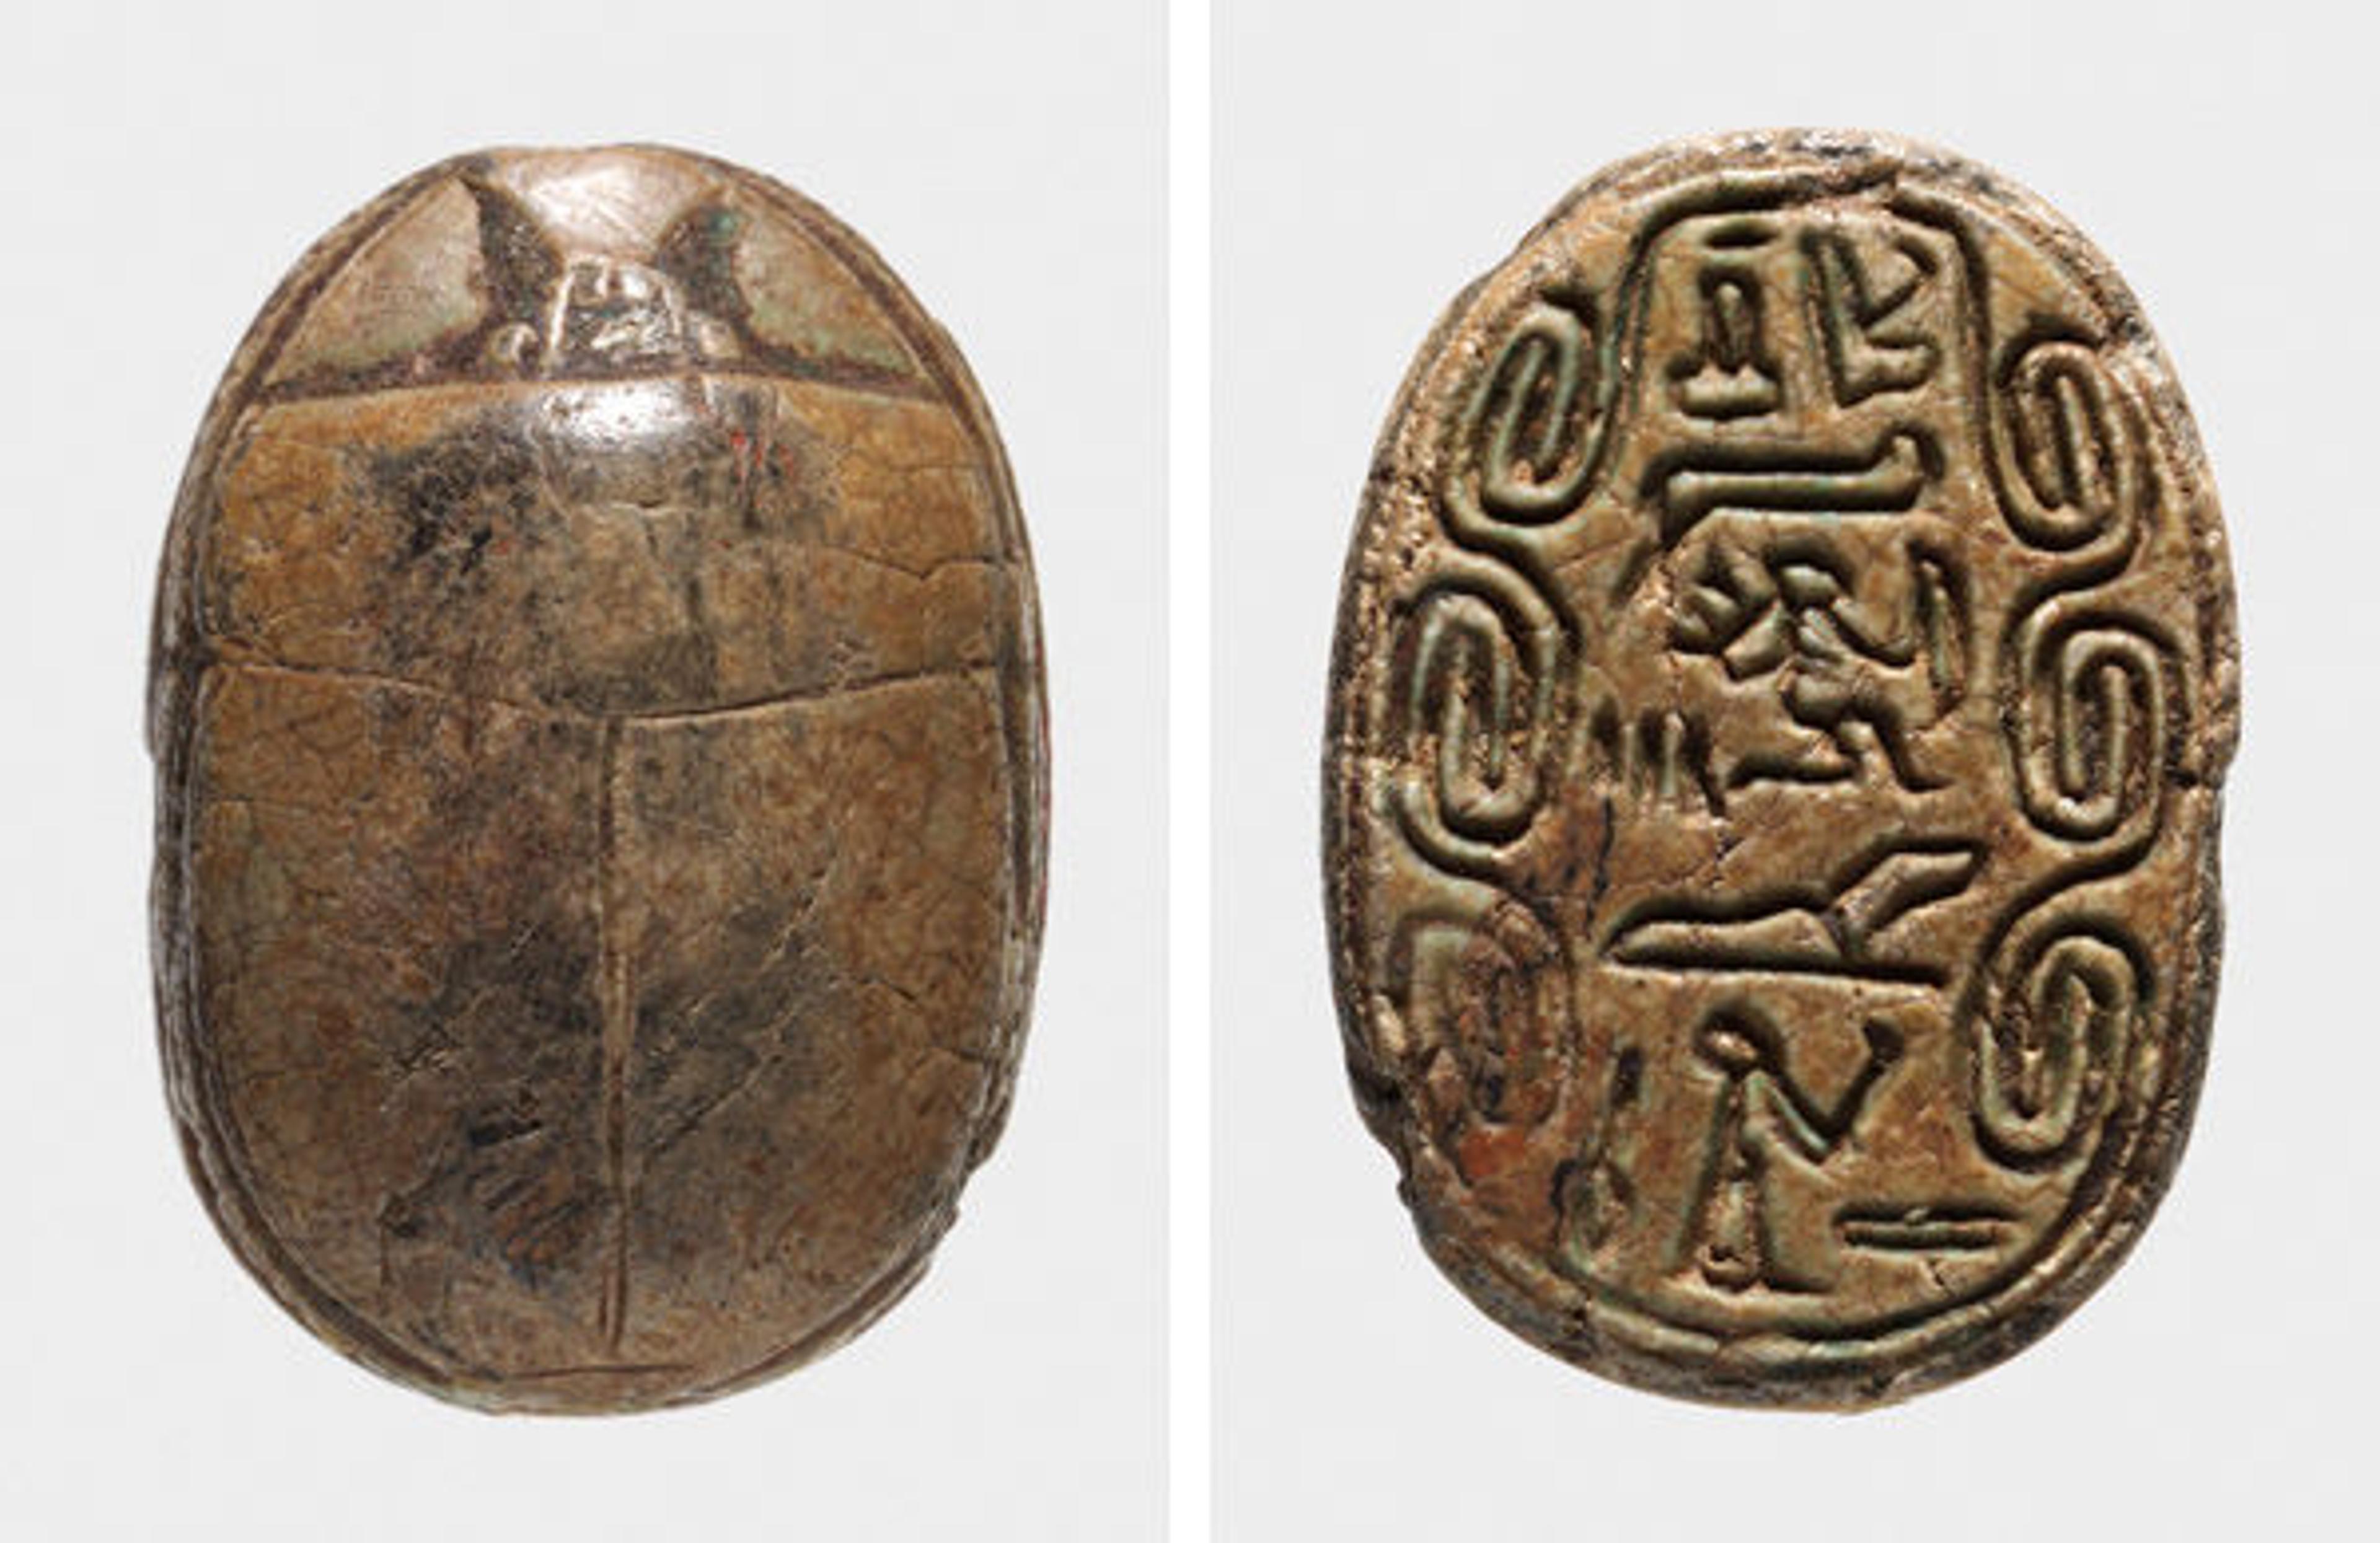 Fig. 4. Scarab of the overseer of the troops Sebeknakht. Middle Kingdom, Dynasty 13, reigns of Sekhemre-khutawi Sebekhotep I to Merneferre Aya (ca. 1802–1677 B.C.). Provenance unknown. Glazed steatite. The Metropolitan Museum of Art, New York, Theodore M. Davis Collection, Bequest of Theodore M. Davis, 1915 (30.8.669)